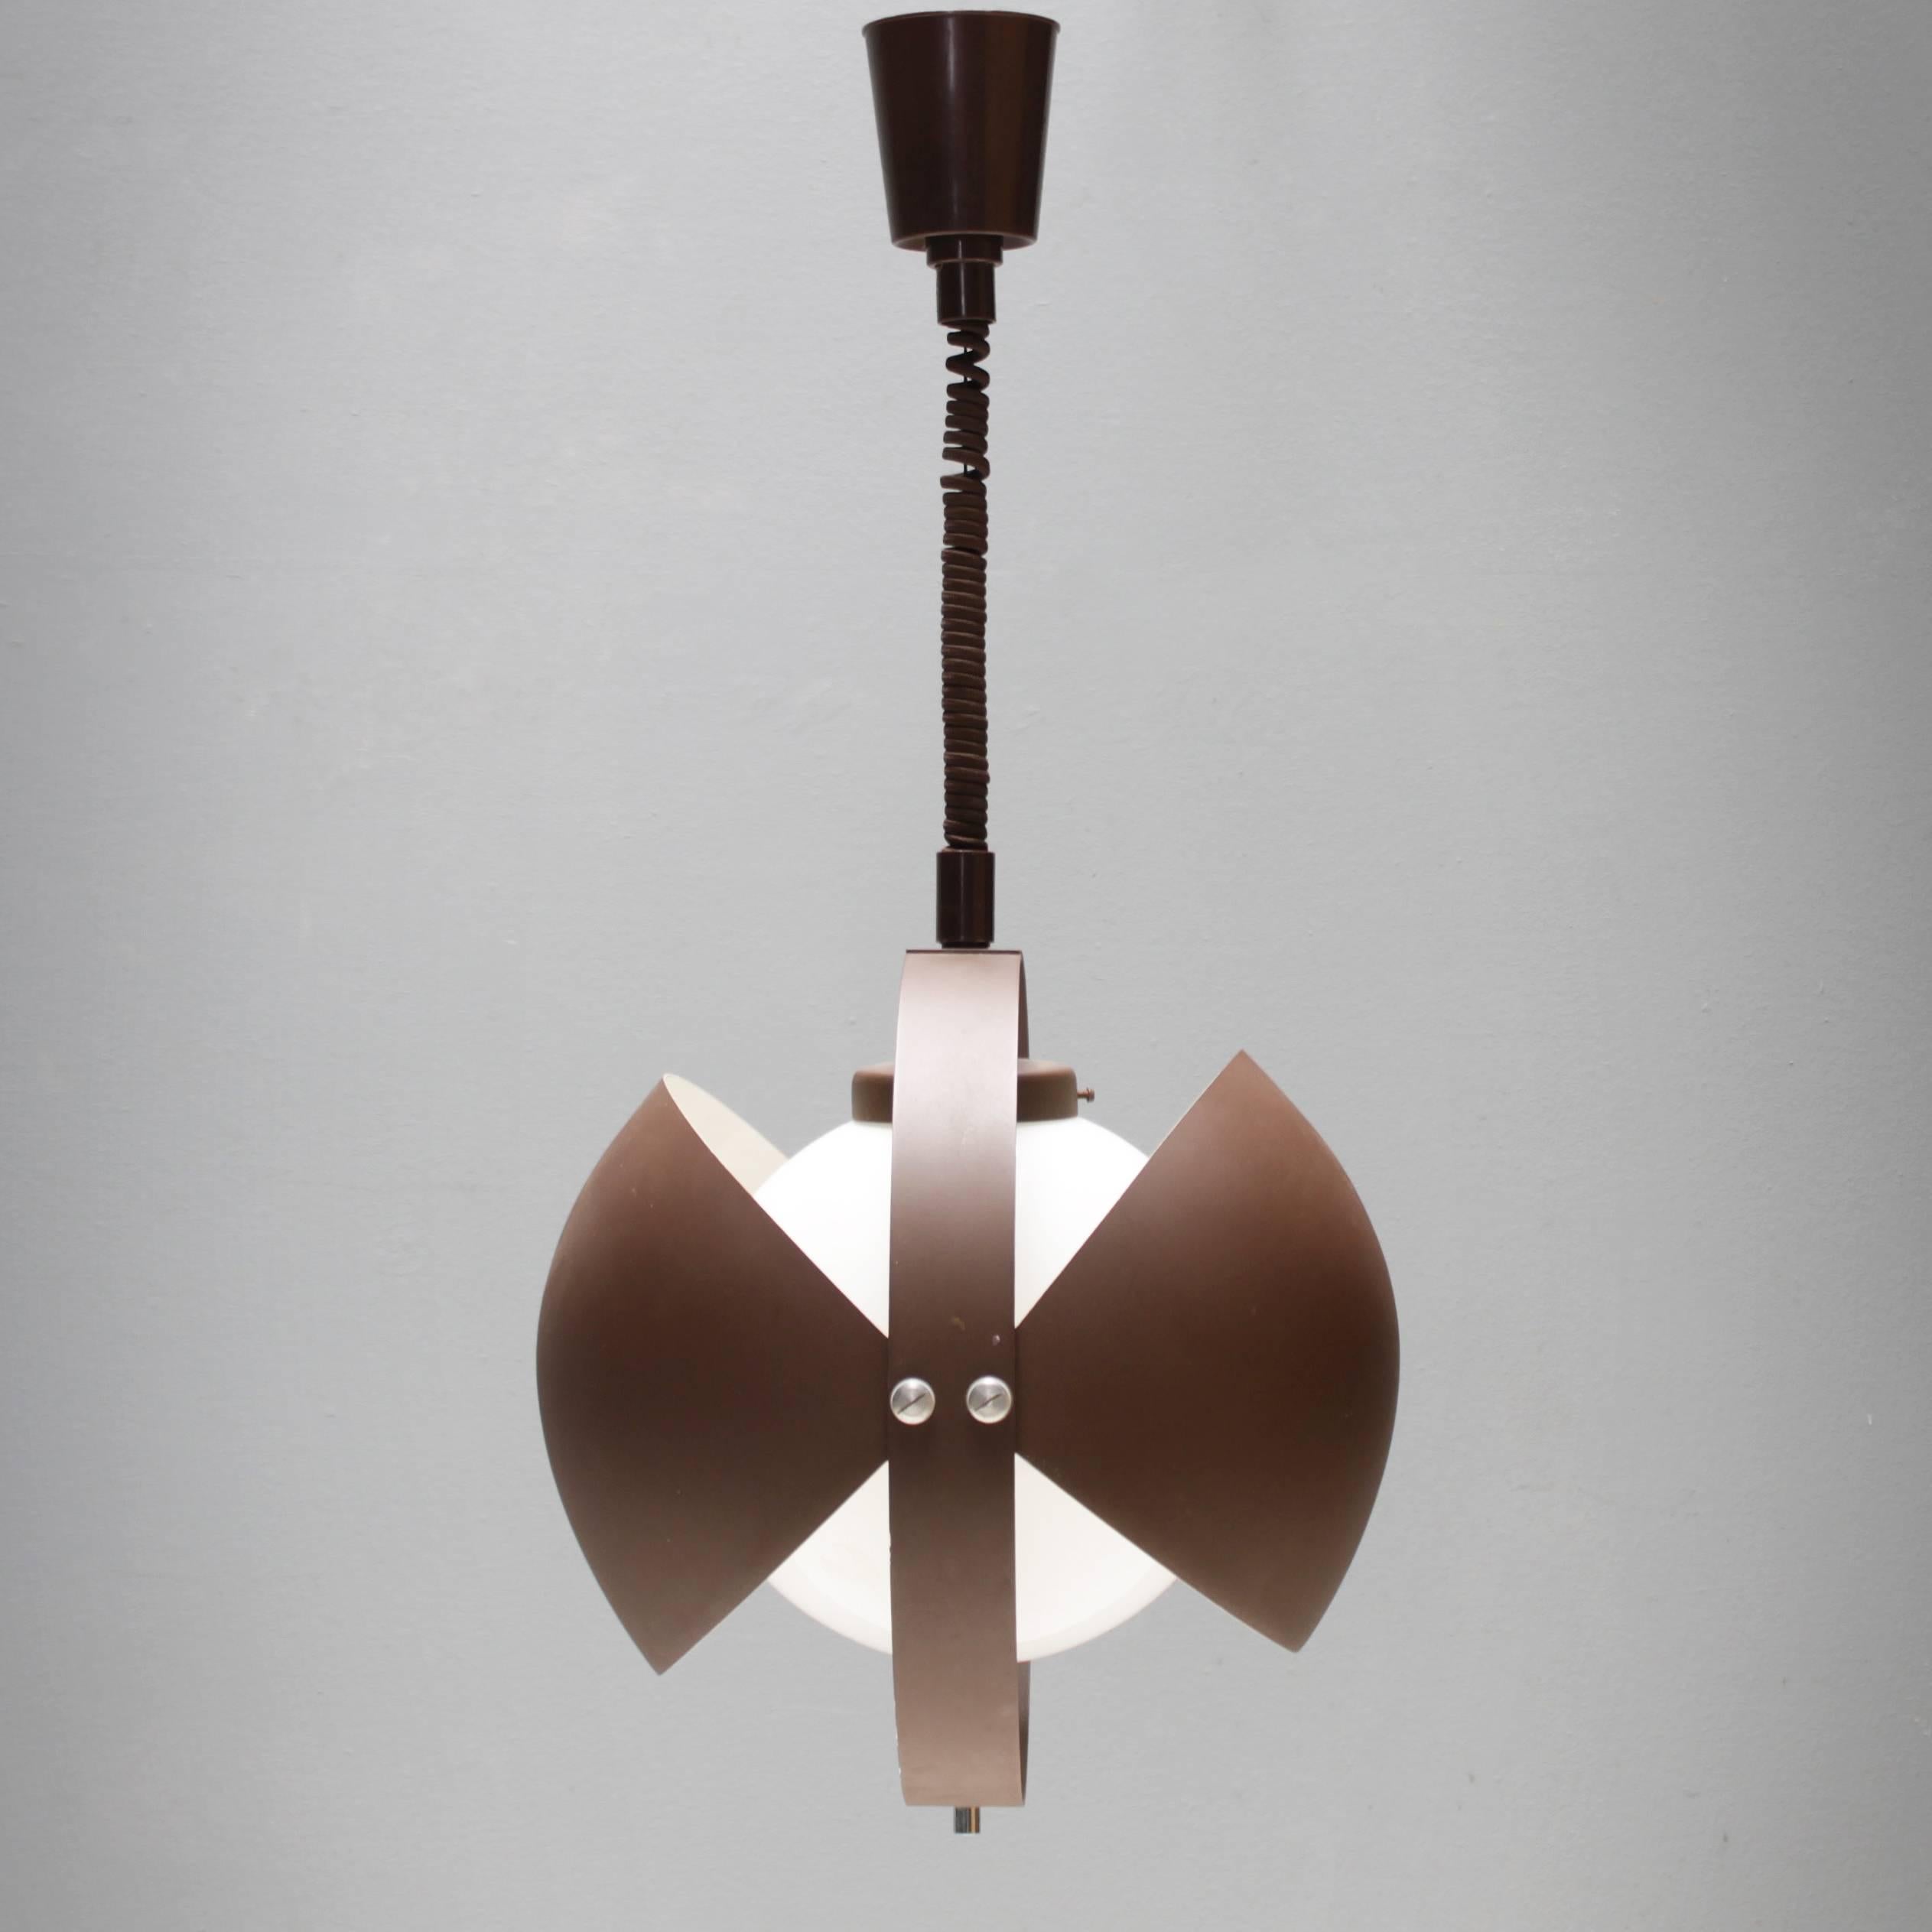 'Poor man's Weisdorf' in the manner of Louis Weisdorf design Classic multi-lite pendant. It's the same idea, this one is made of brown thin lacquered aluminum. Although not as beautiful as the real stuff but also a nice lamp. Adjustable in height.